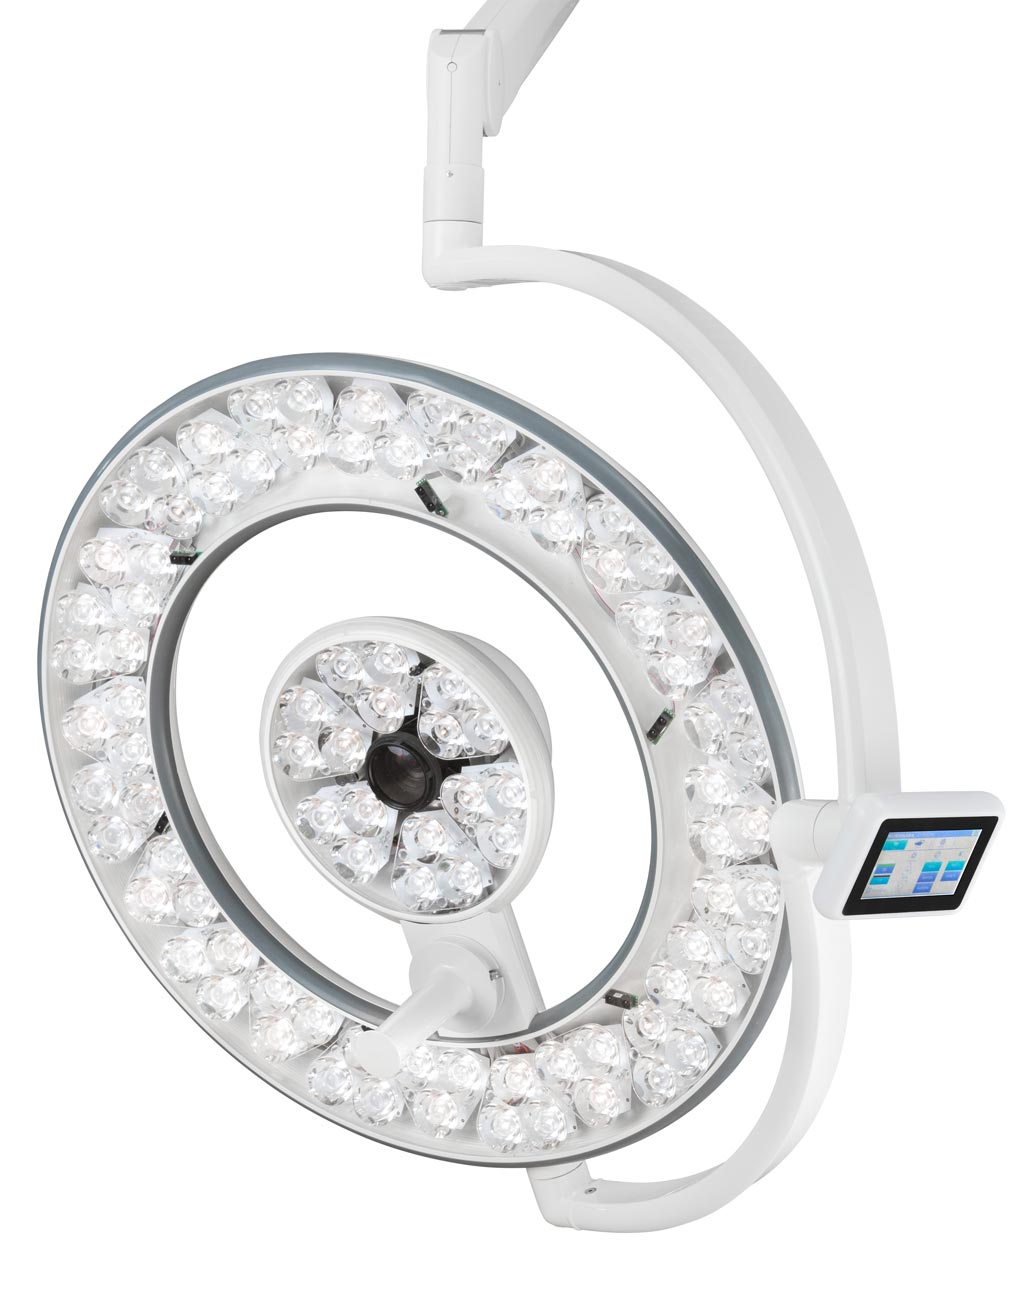 Image: The Q-Flow surgical light (Photo courtesy of Merivaara).